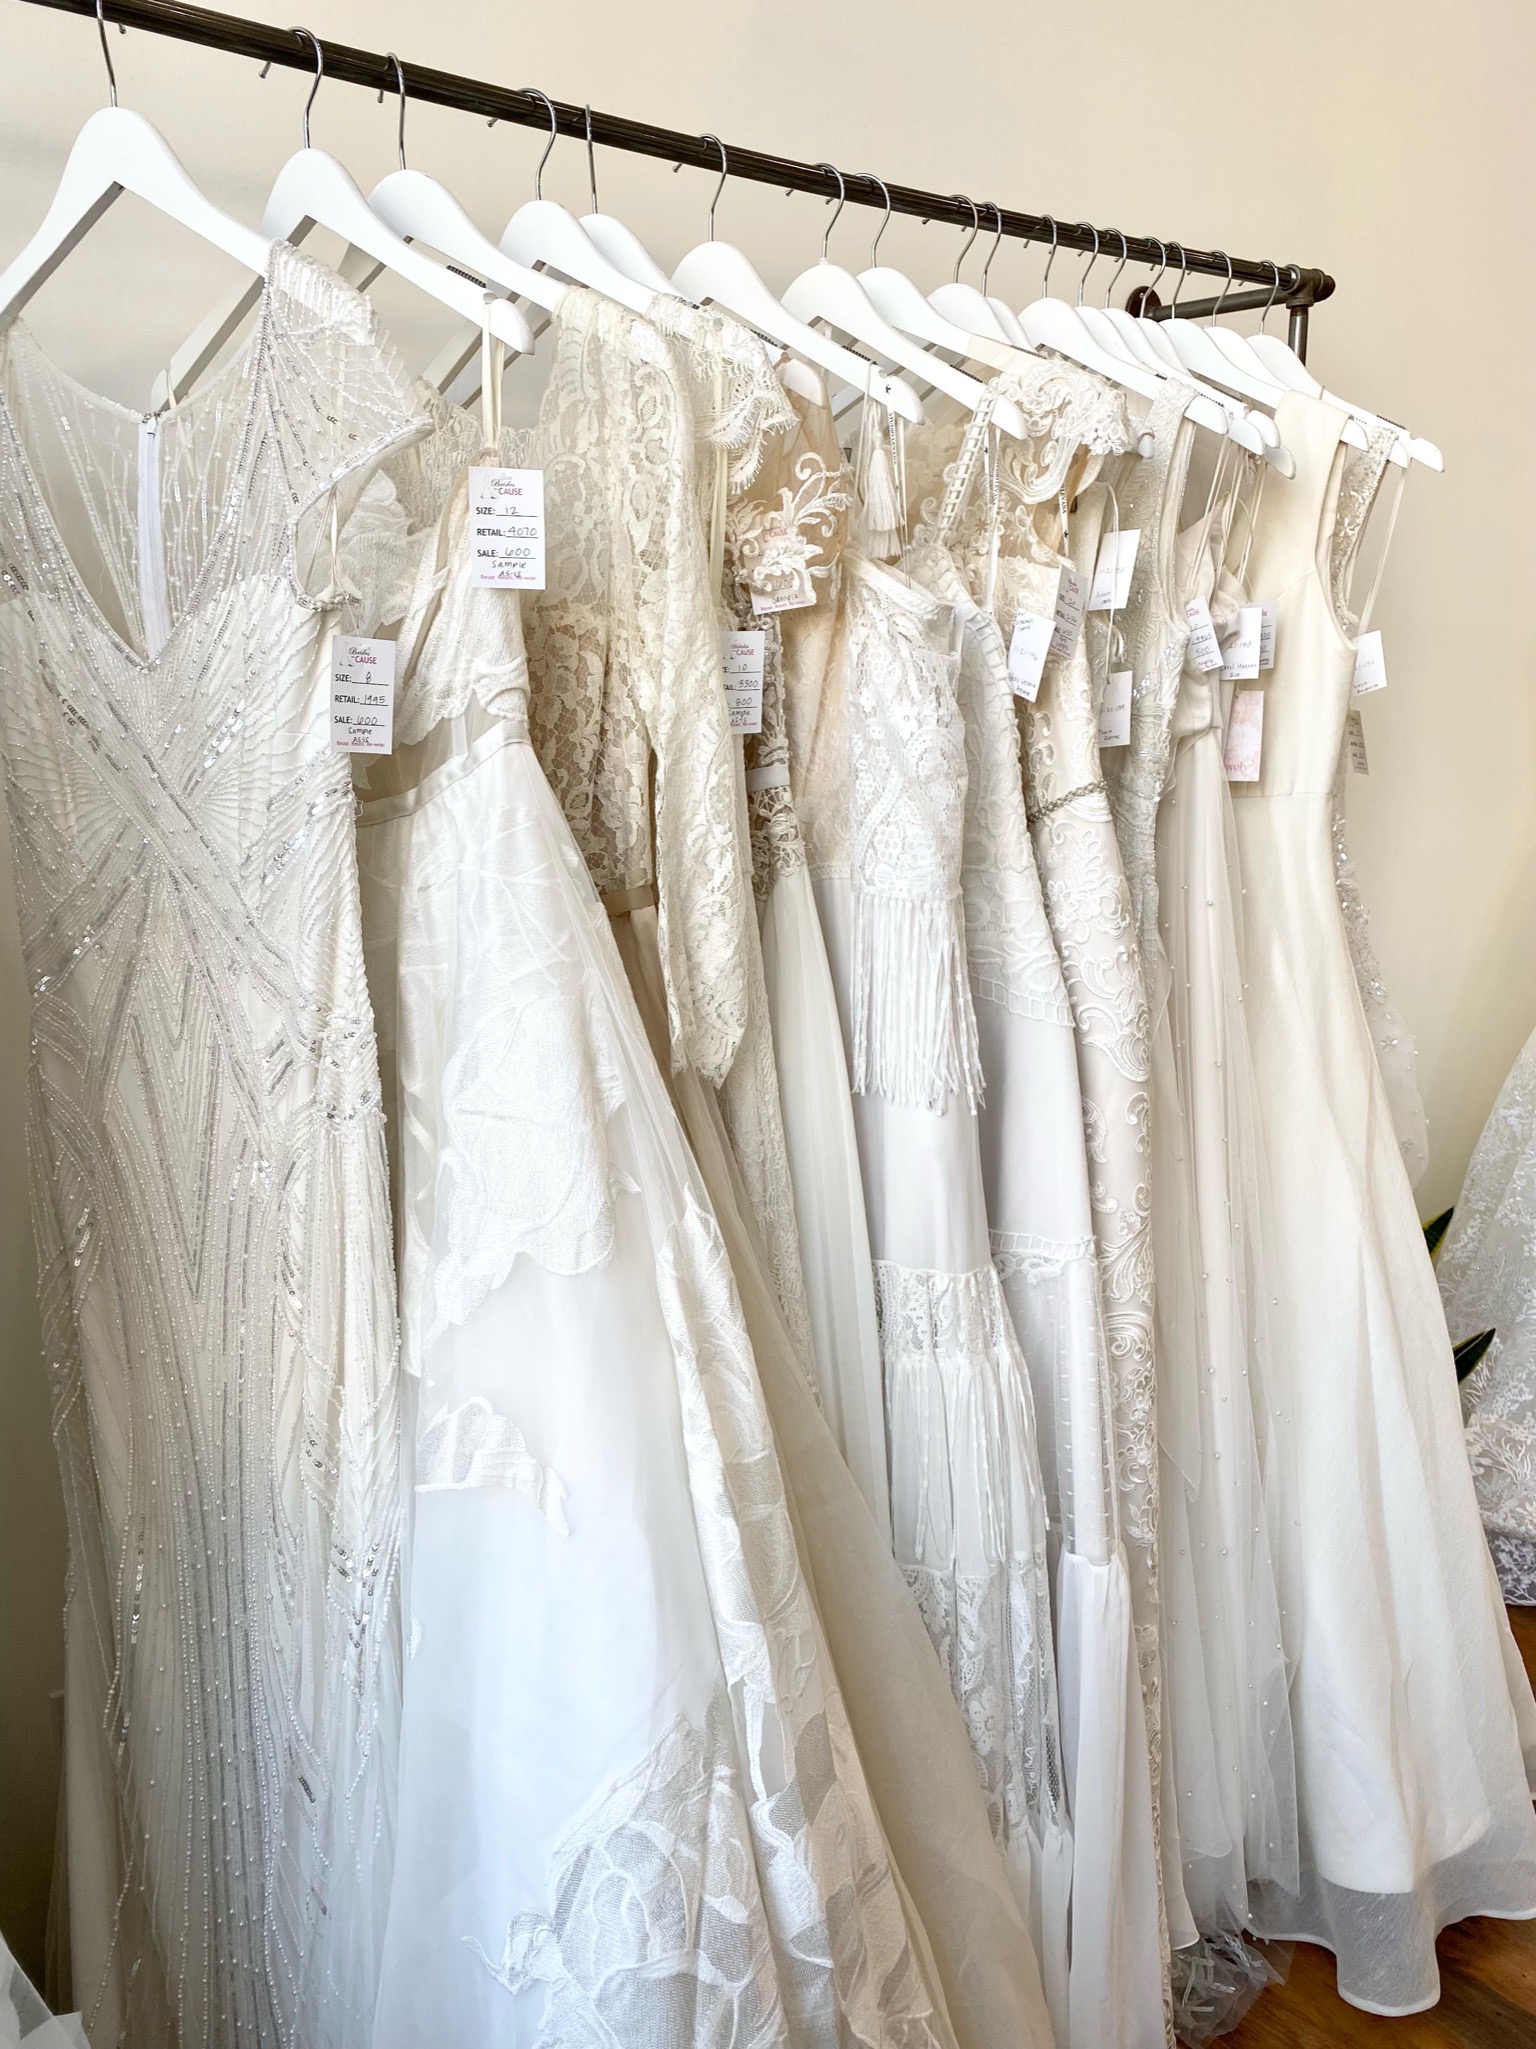 New inventory from Lovely Bride Philadelphia! | Brides for a Cause